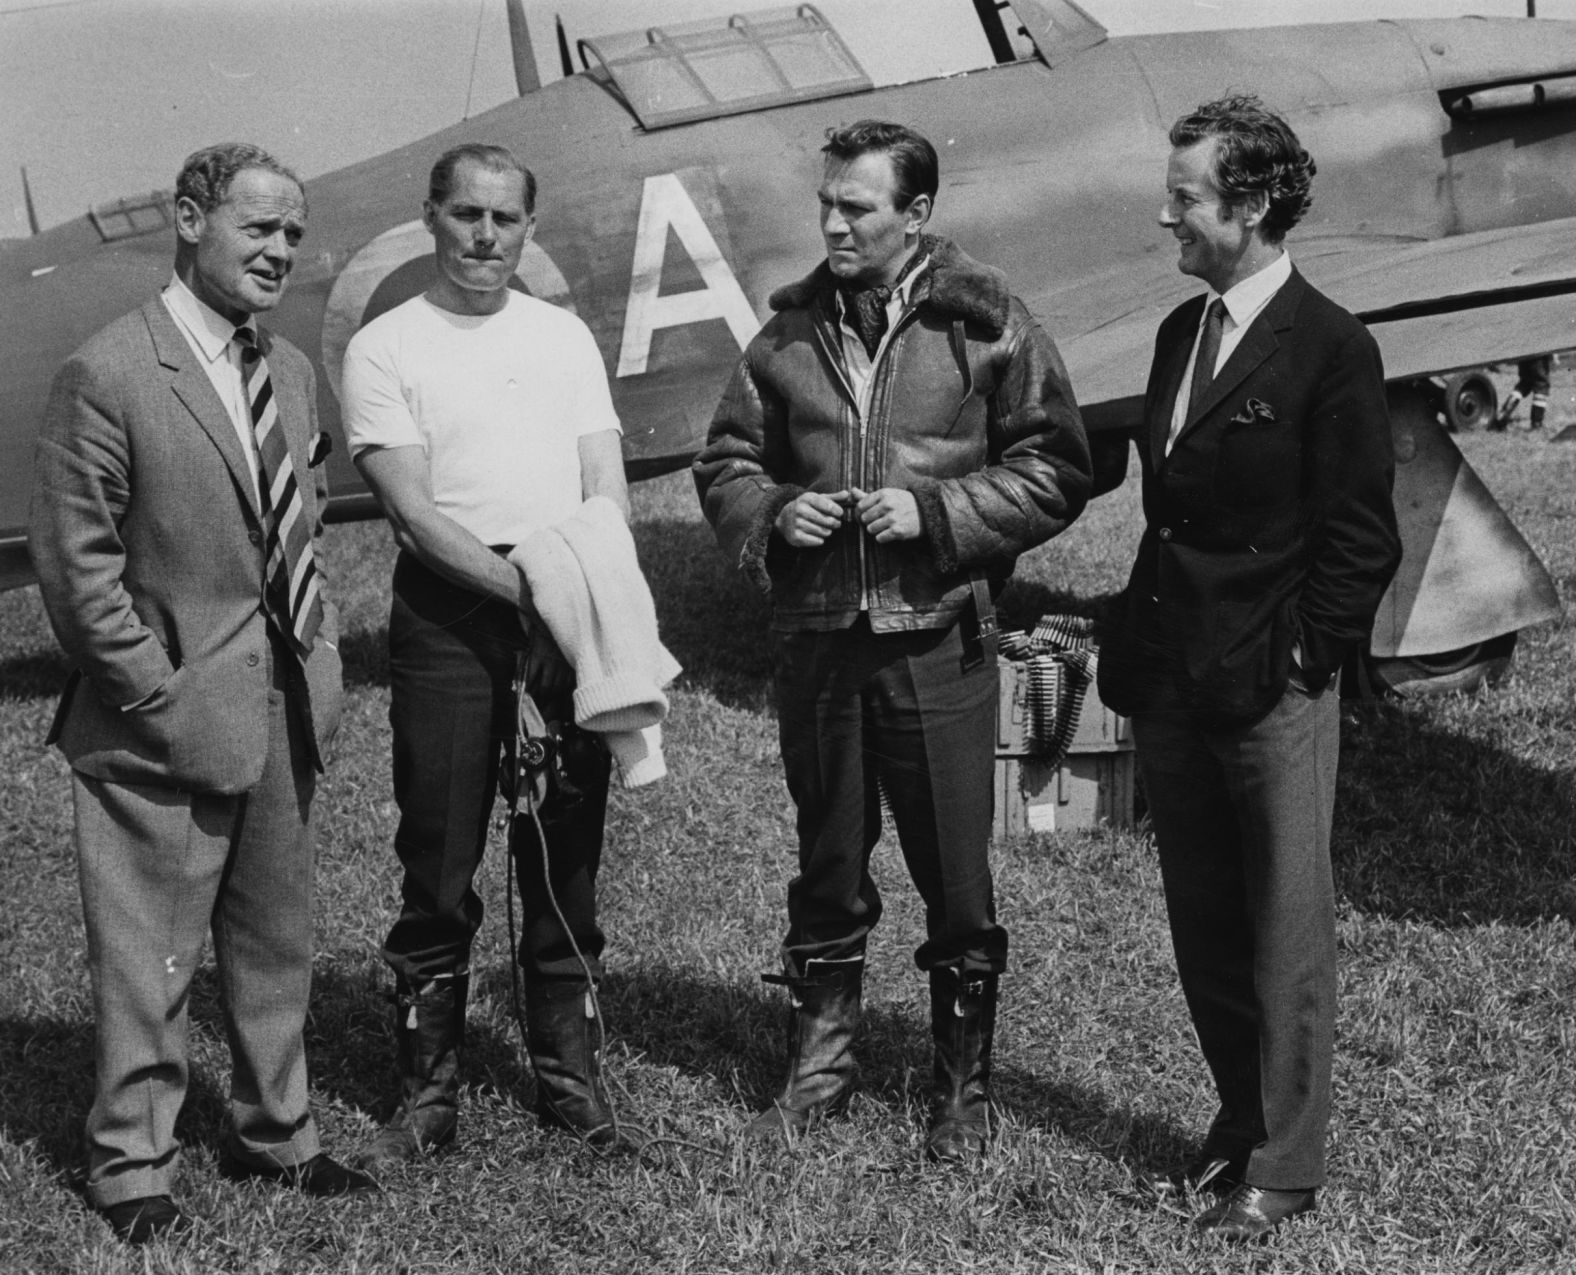 Plummer, second from right, and fellow actor Robert Shaw, second from left, talk to pilots about the making of the film "The Battle of Britain" in 1968.